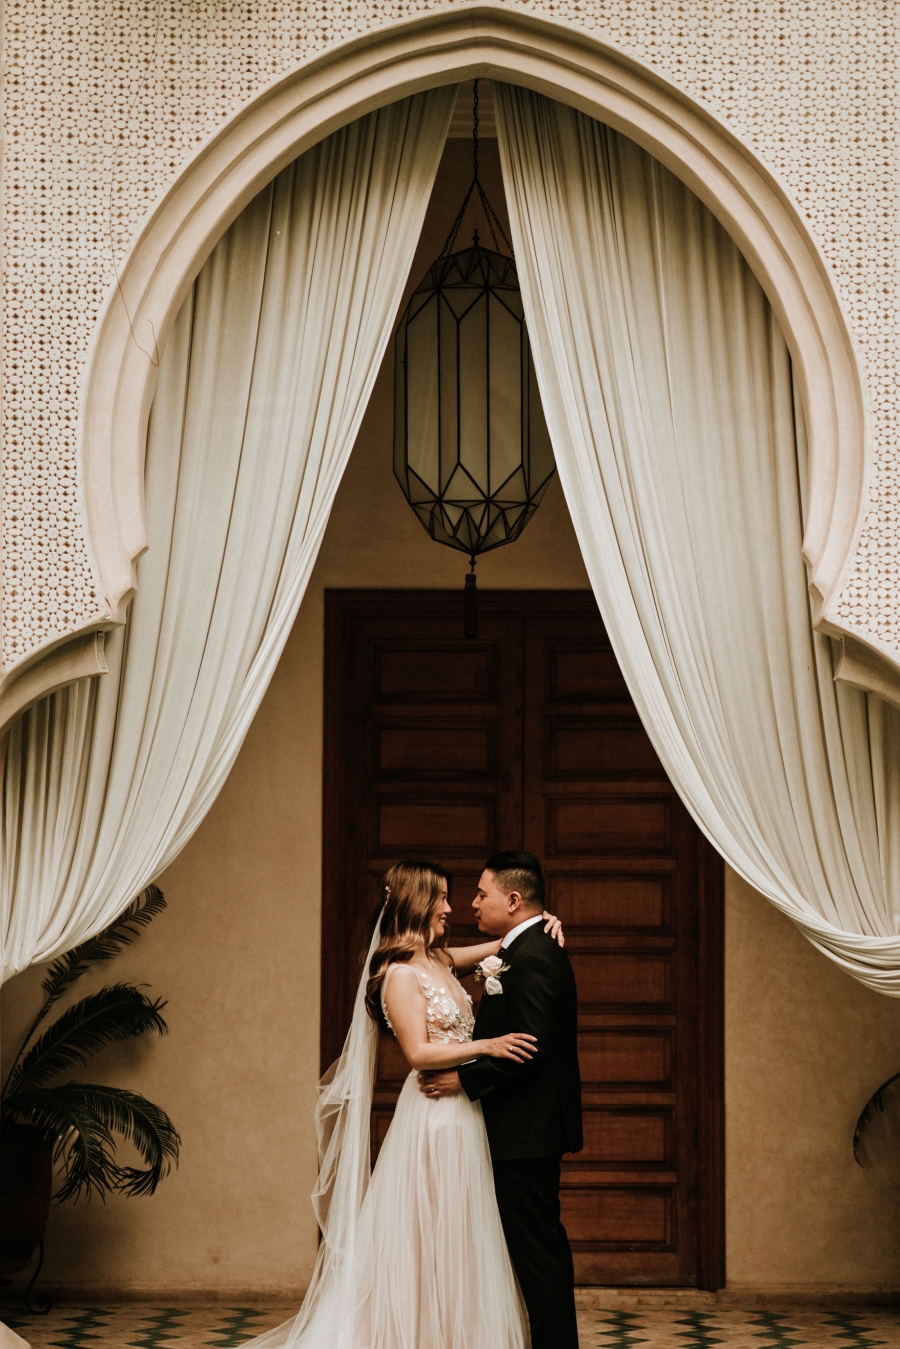 Morocco Marrakech Elopement And Pre-Wedding Photoshoot In The Medina Riad by A.Y. on OneThreeOneFour 21